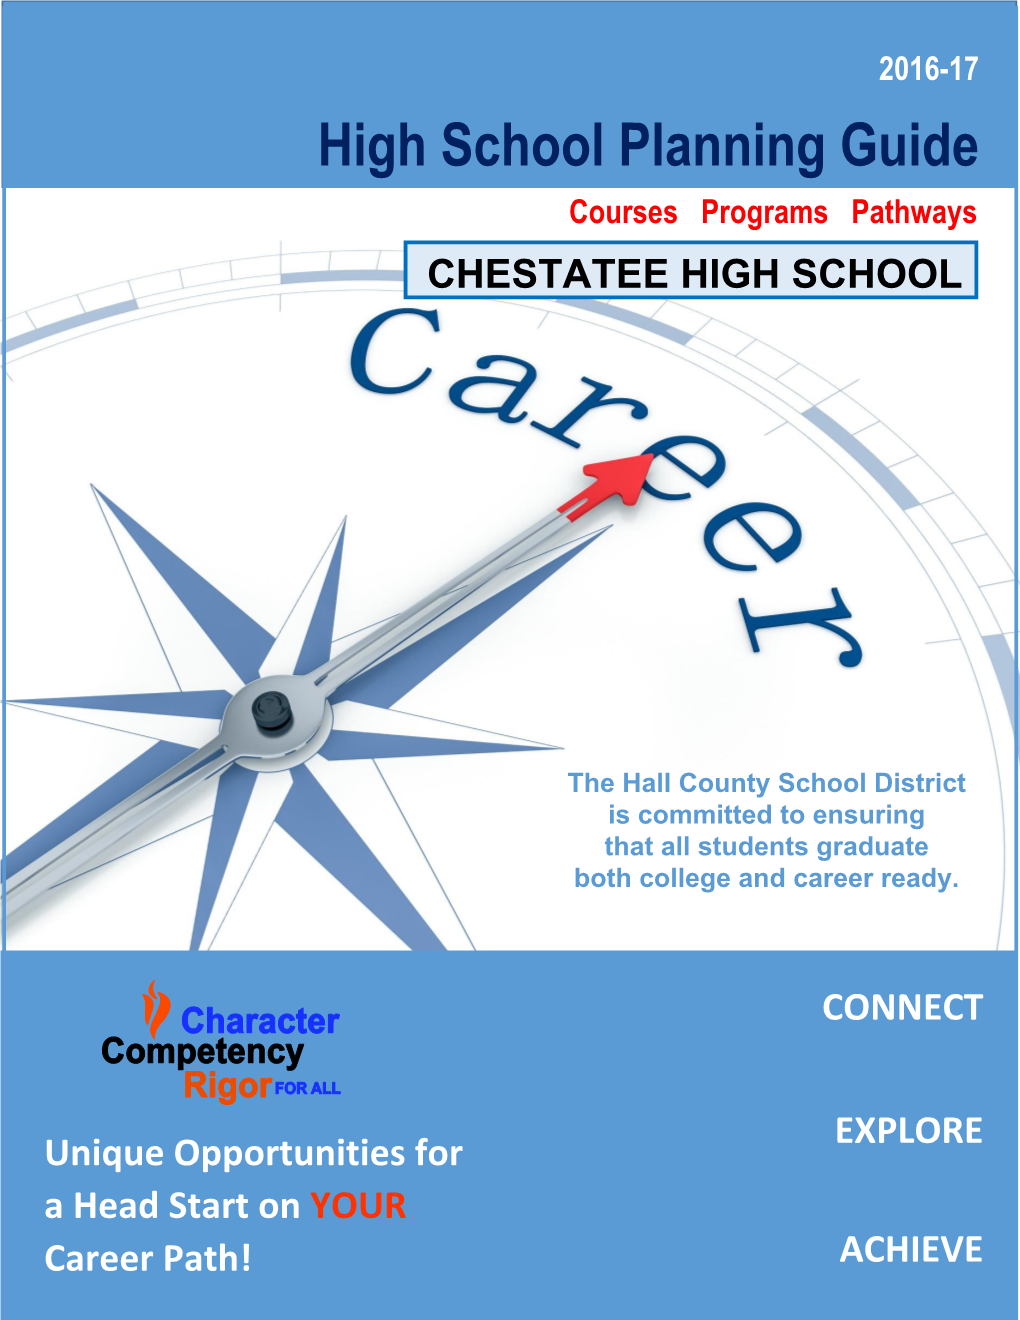 High School Planning Guide Courses Programs Pathways CHESTATEE HIGH SCHOOL